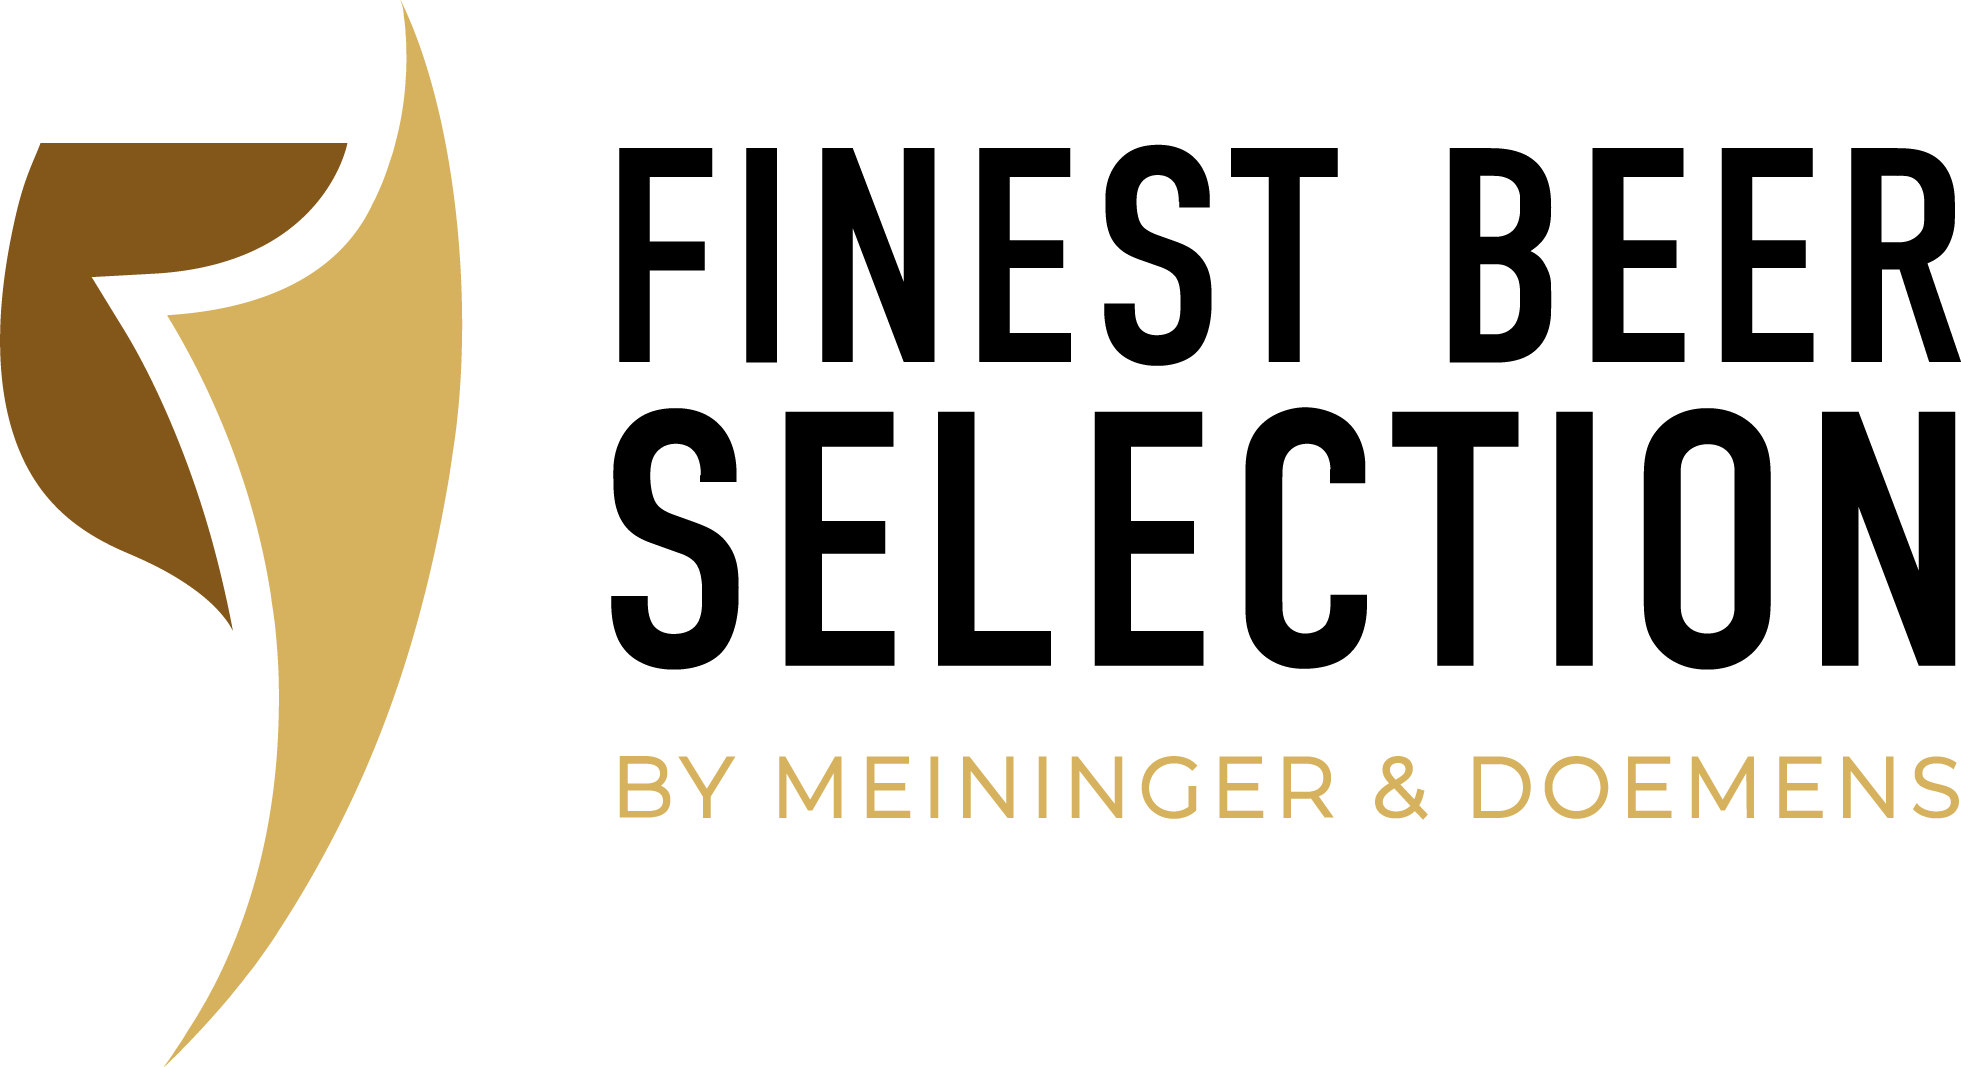 Fines Beer Selection by Meininger & Doemens